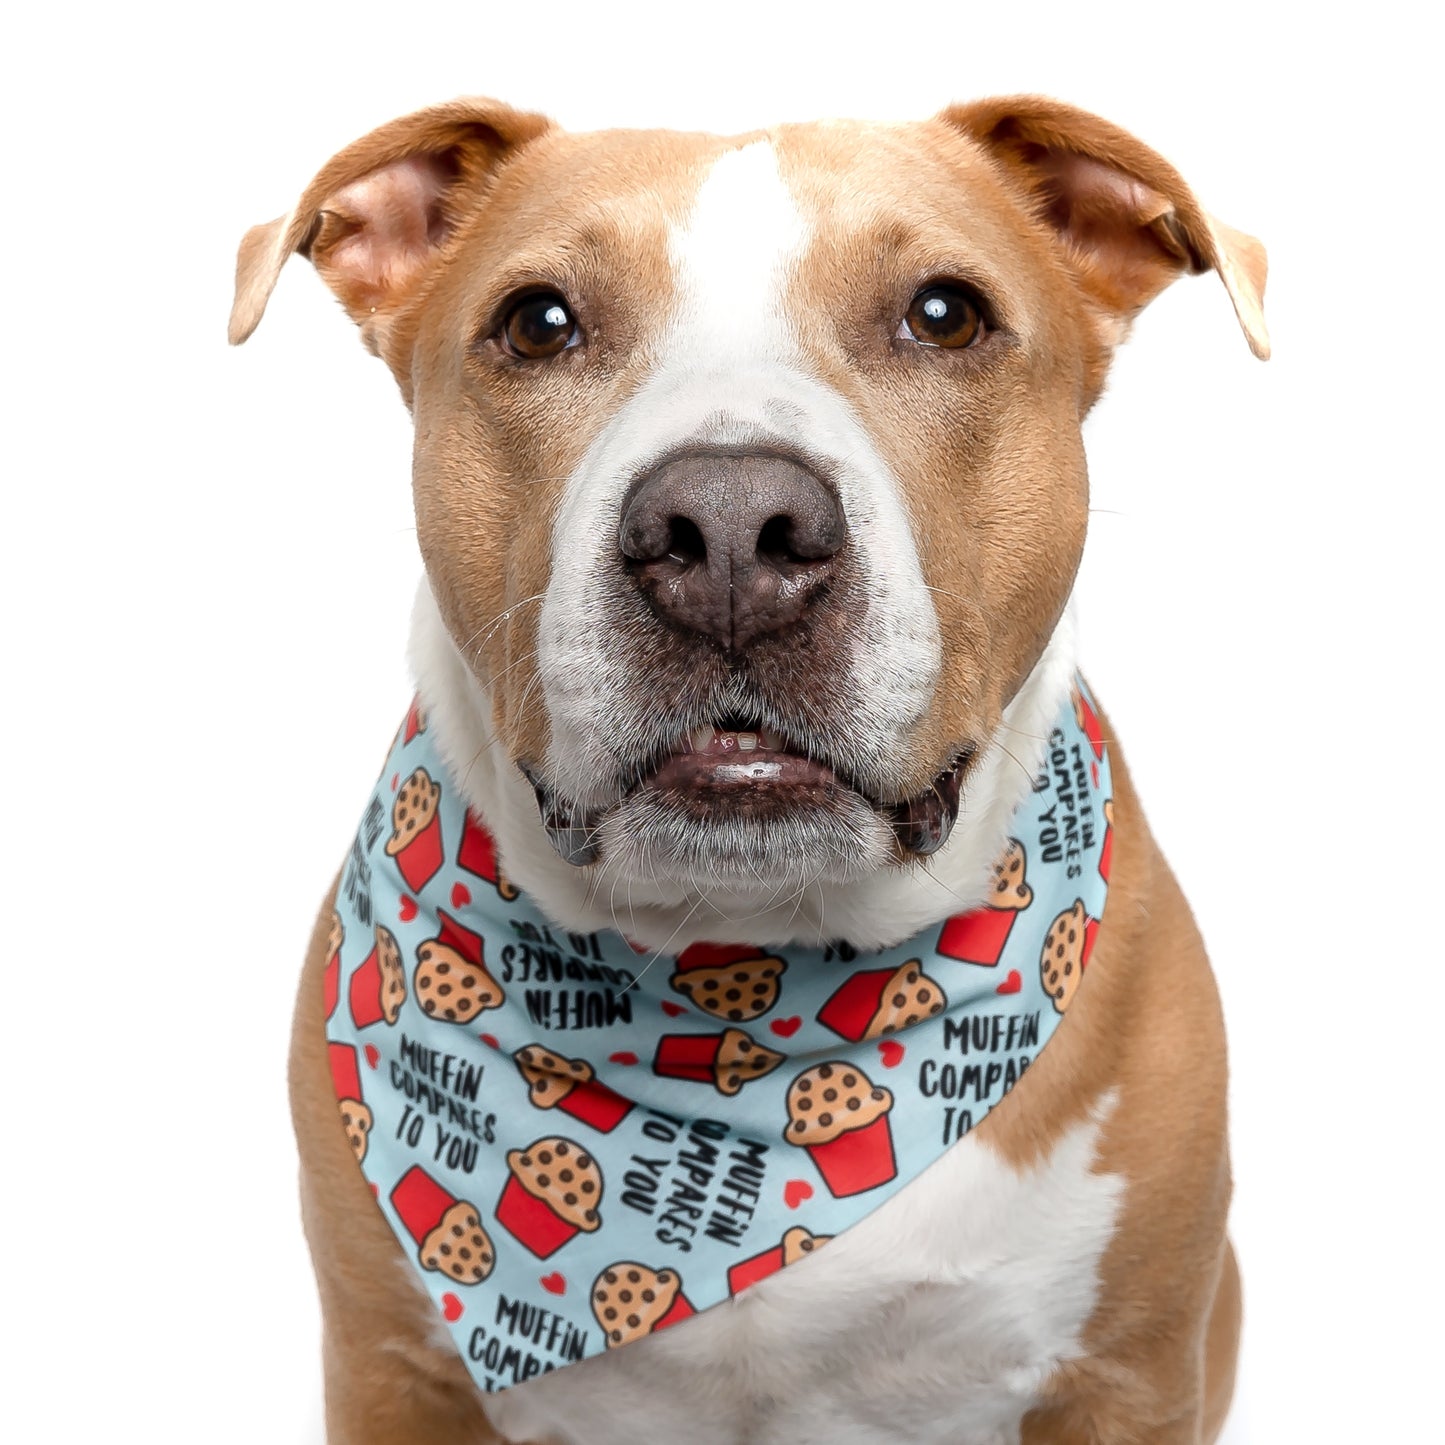 MUFFIN COMPARES TO YOU - CLASSIC DOG BANDANA BY DAPPER DEXTER